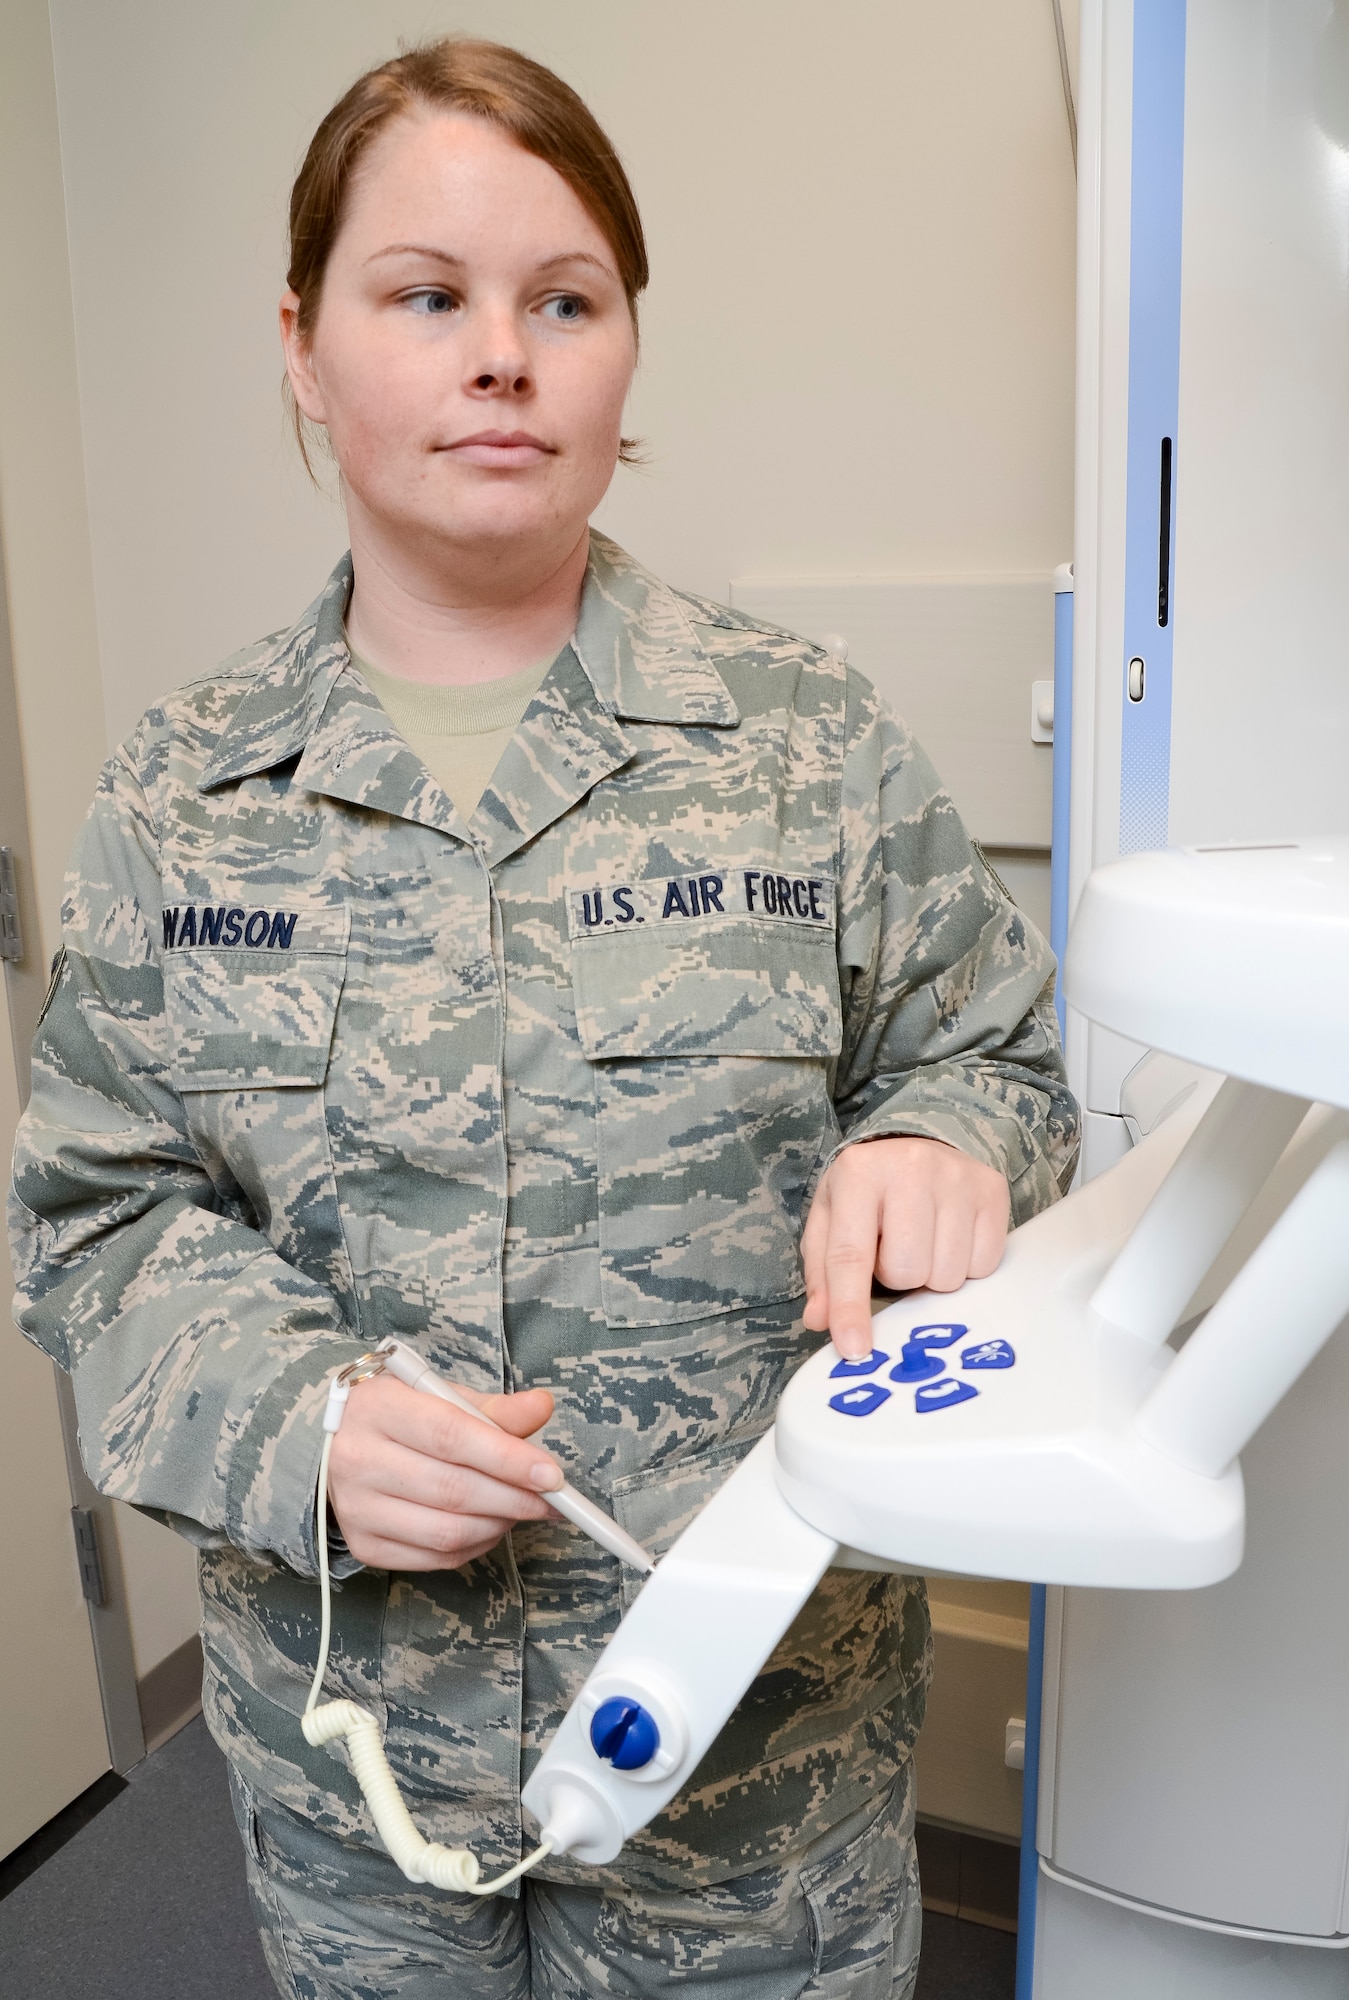 U.S. Air Force Senior Airman Meghan Swanson, a dental technician with the 116th Air Control Wing, Georgia Air National Guard (ANG), adjusts settings on a Planmeca Promax imaging unit in preparation to give dental x-rays at Robins Air Force Base, Ga., May 2, 2013.  Swanson works in the 116th Medical Group as a full-time dual-status civil service employee whose position is tied to an ANG military position.  (U.S. Air National Guard photo by Master Sgt. Roger Parsons/Released)